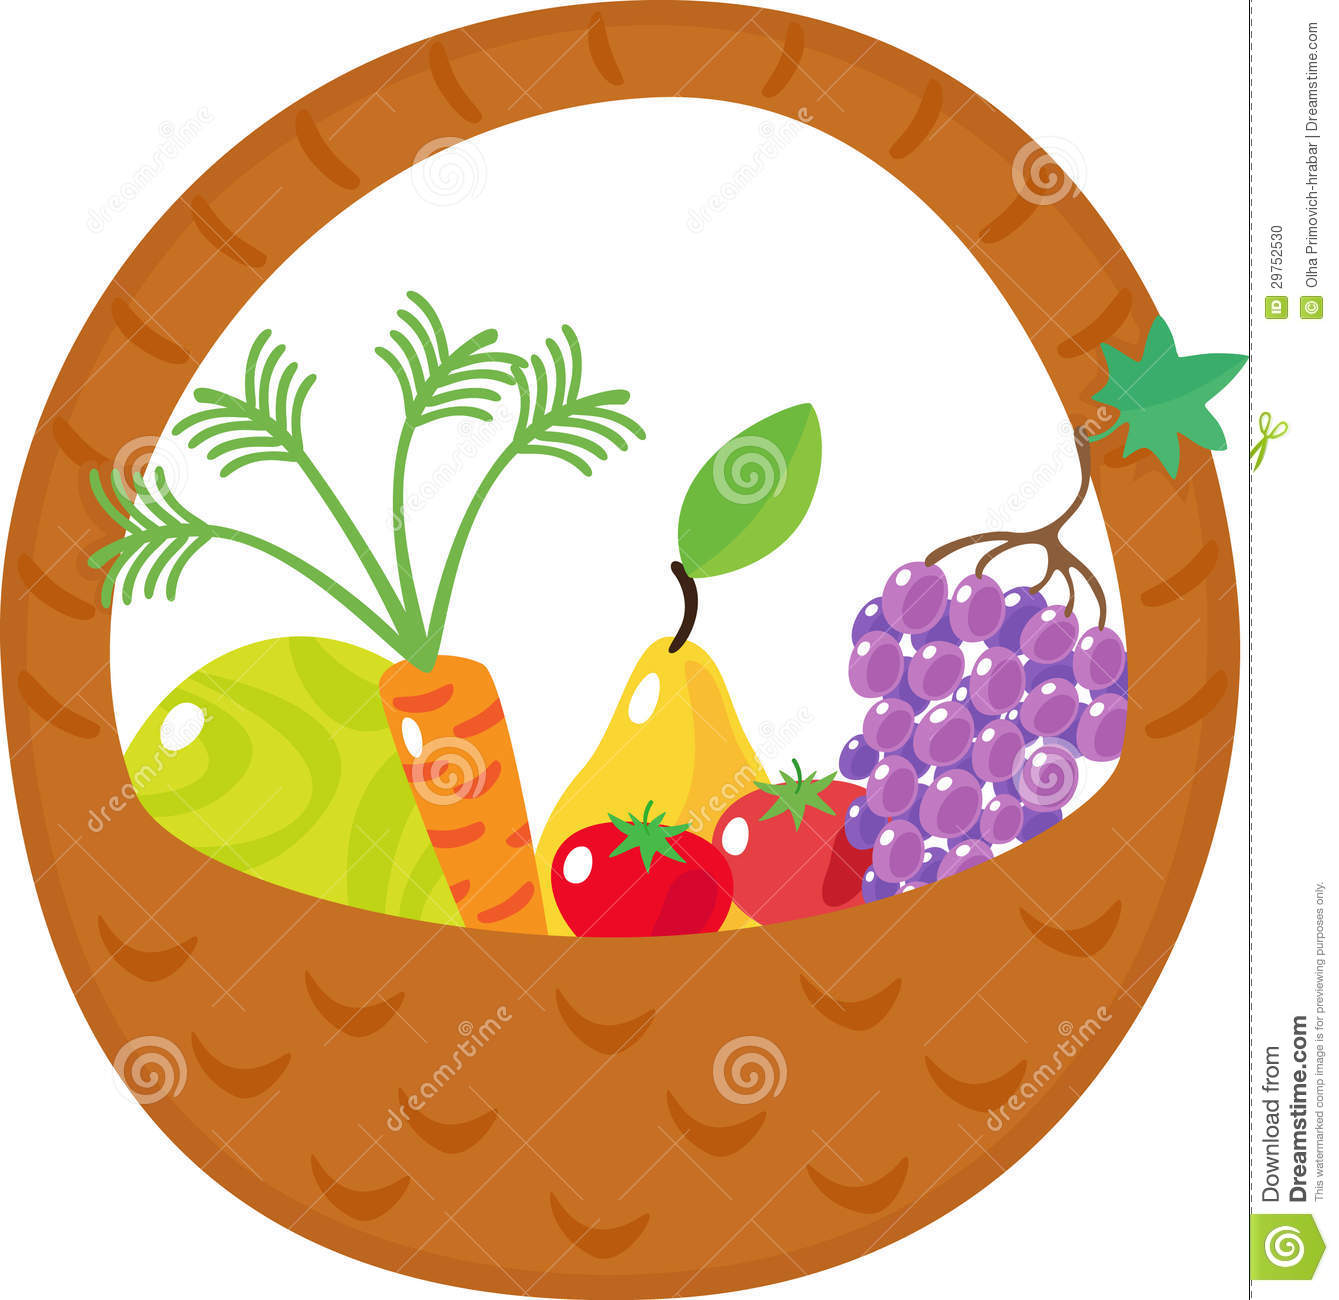 Basket With Cabbage, Carrots, Grapes, Pears, Tomat Stock Photo.